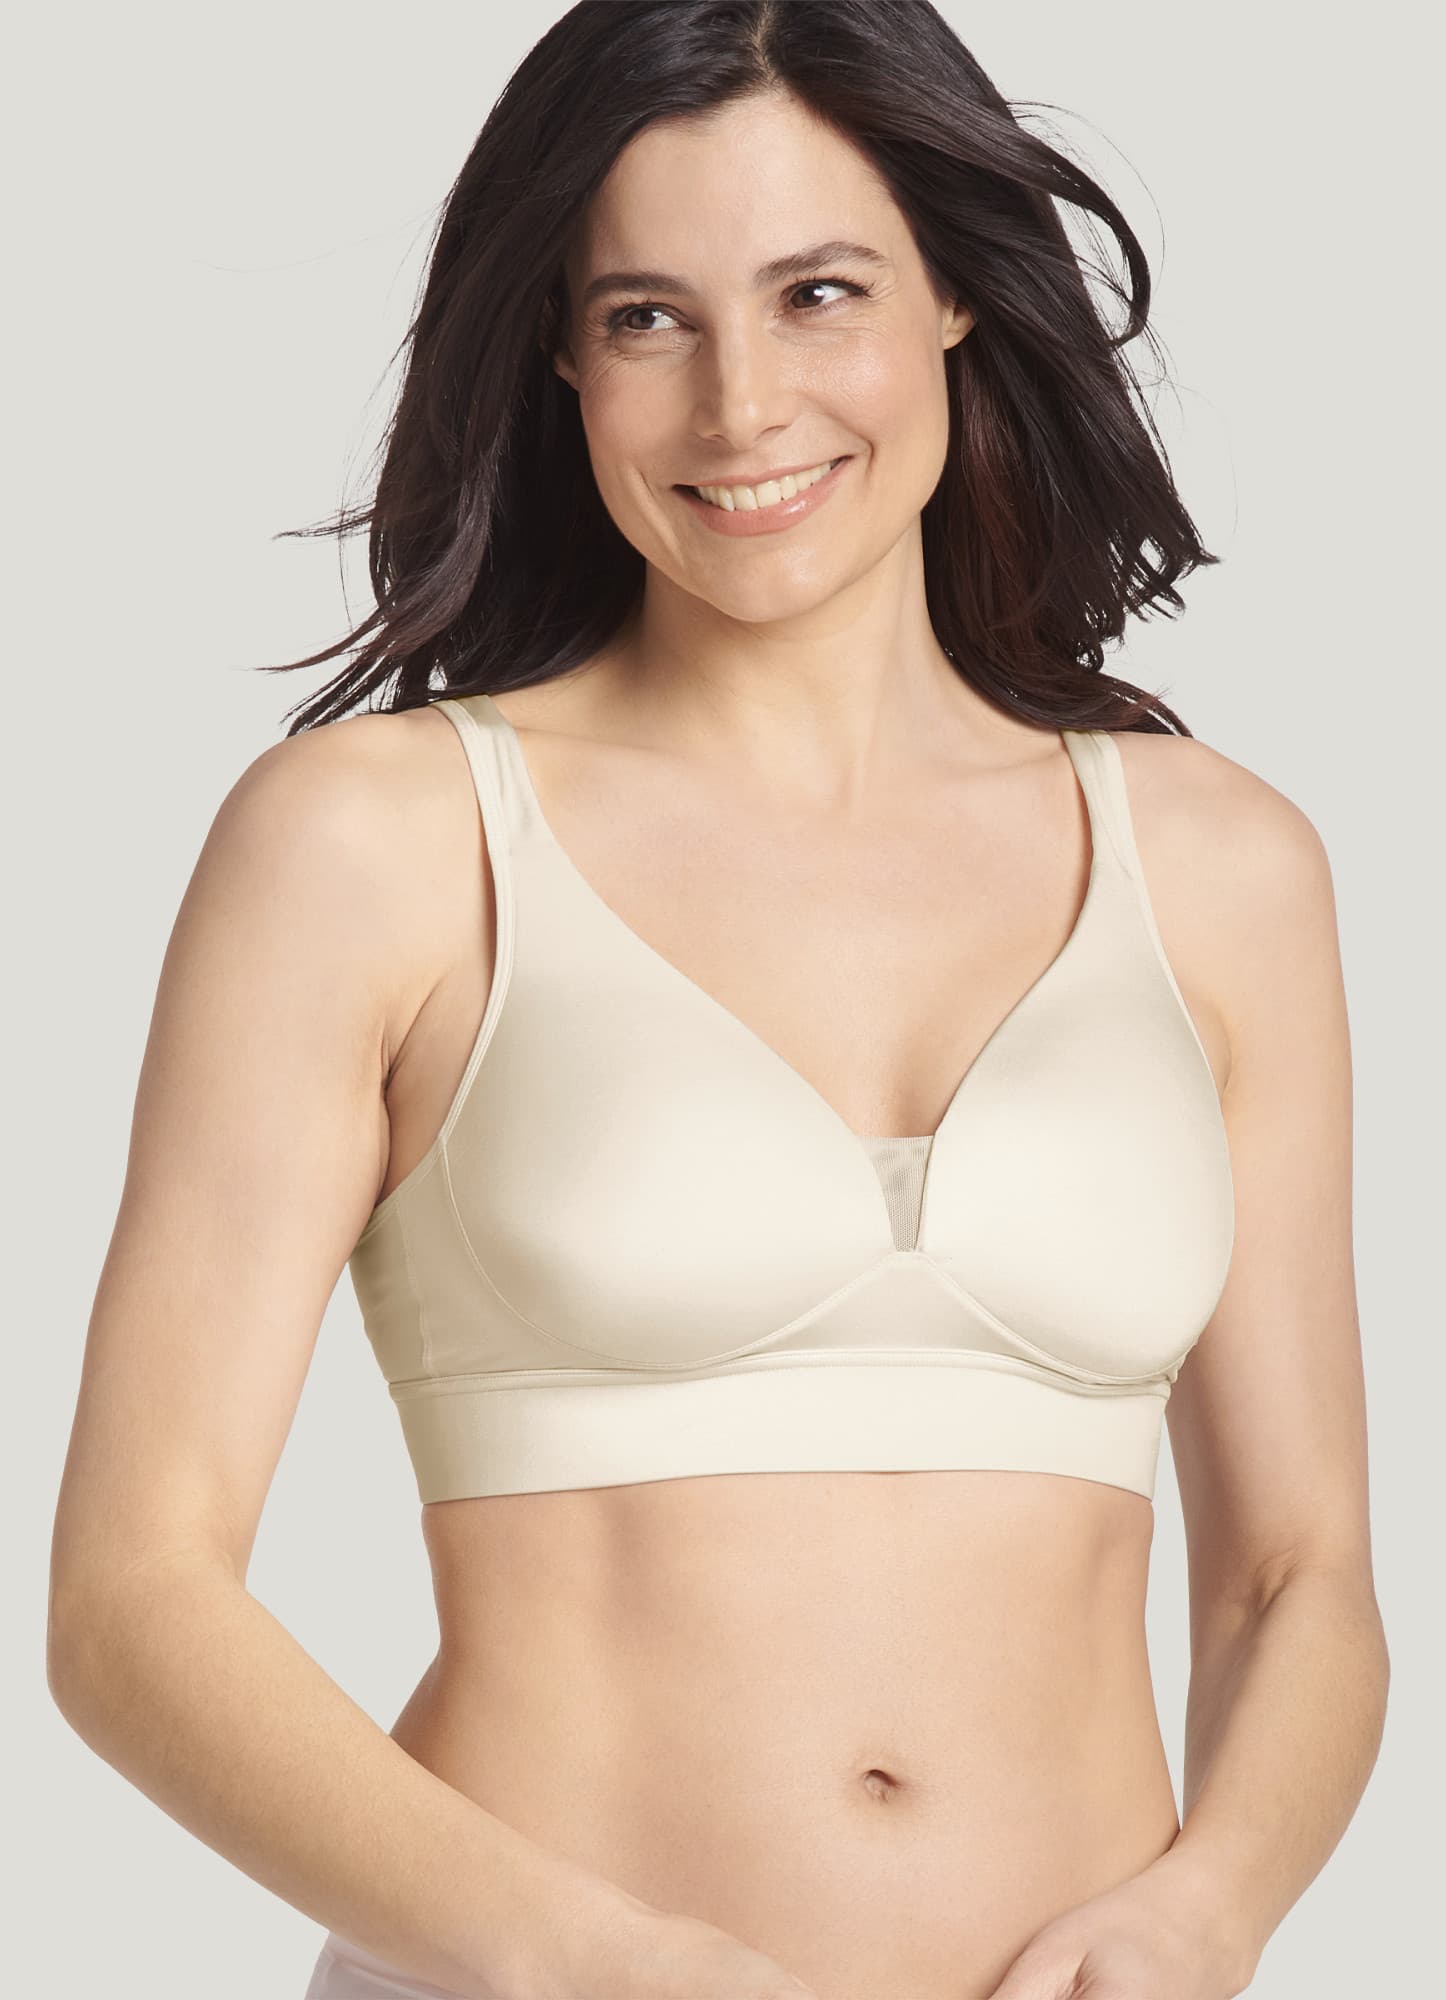 Jockey® Forever Fit™ Full Coverage Molded Cup Bra